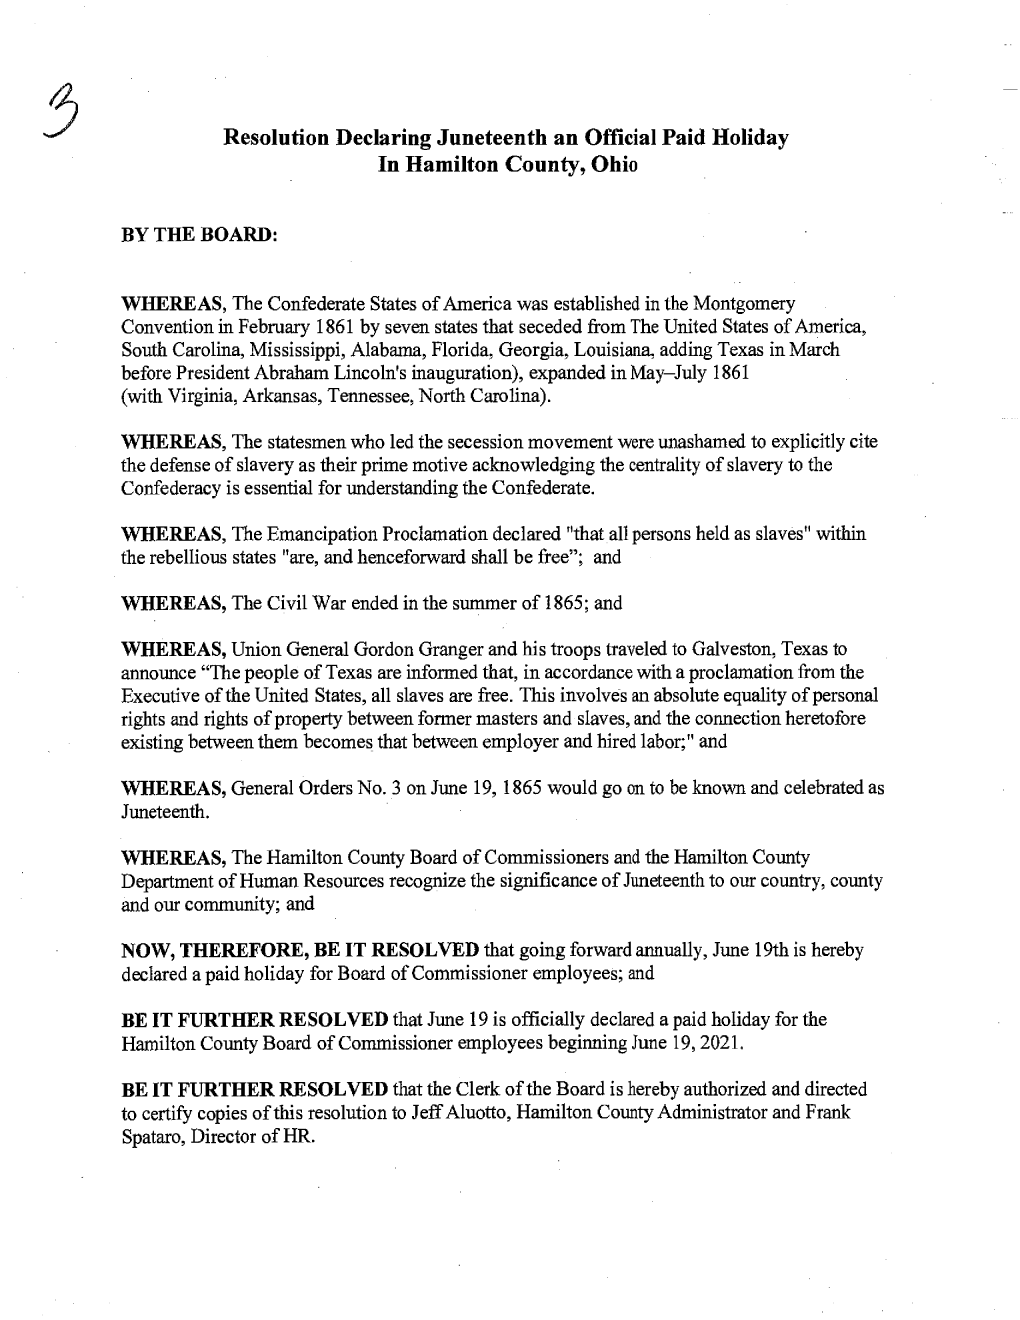 Resolution Declaring Juneteenth an Official Paid Holiday in Hamilton County, Ohio